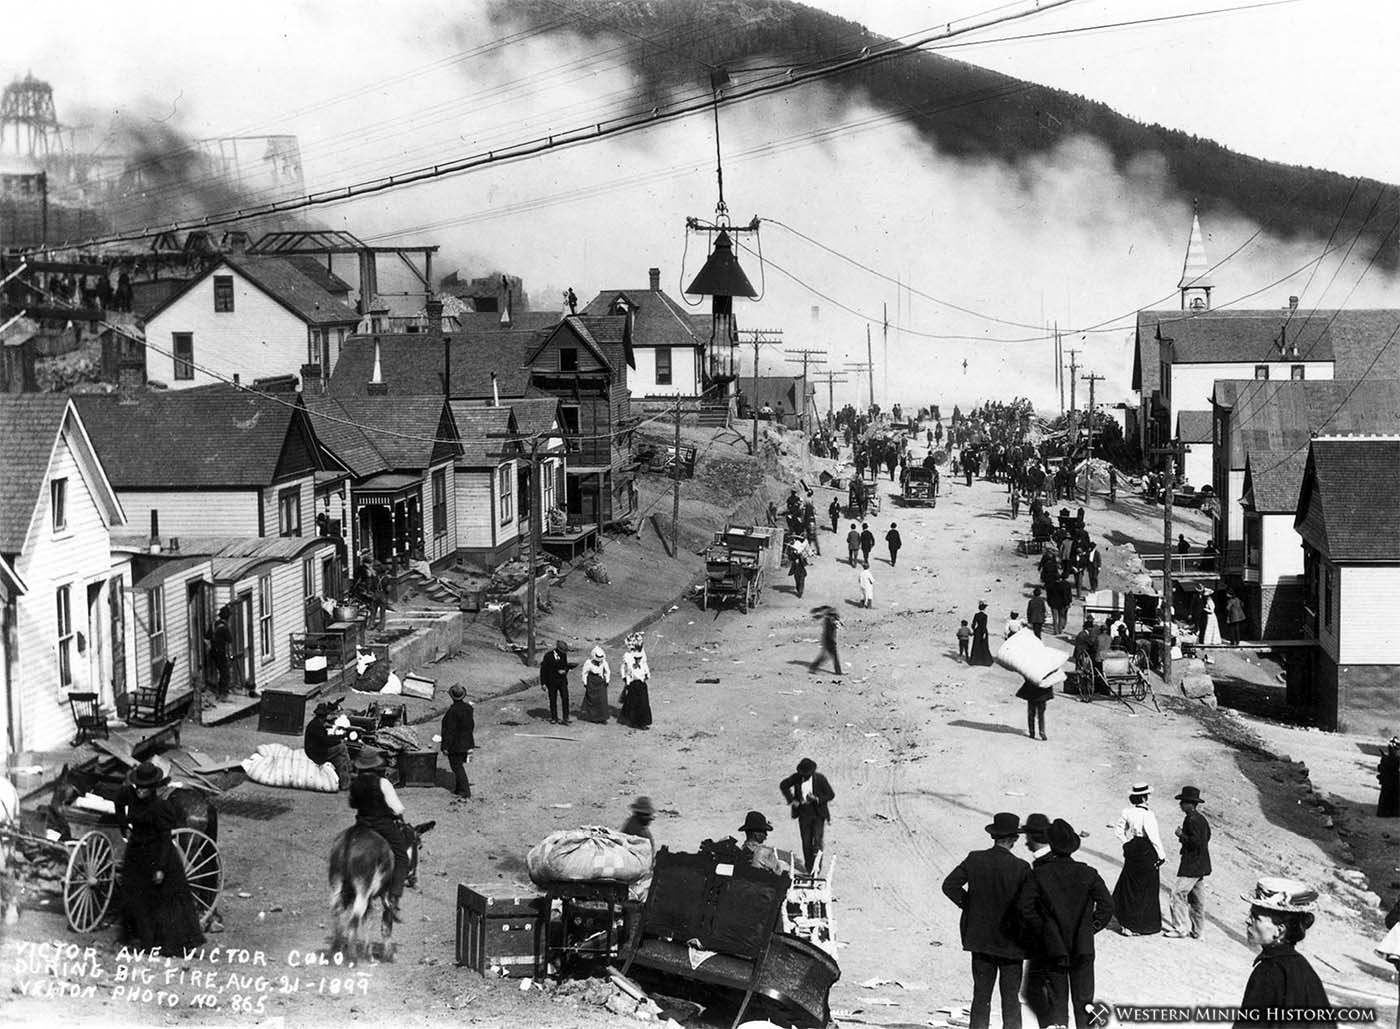 Victor, Colorado during the big fire - August 21, 1899